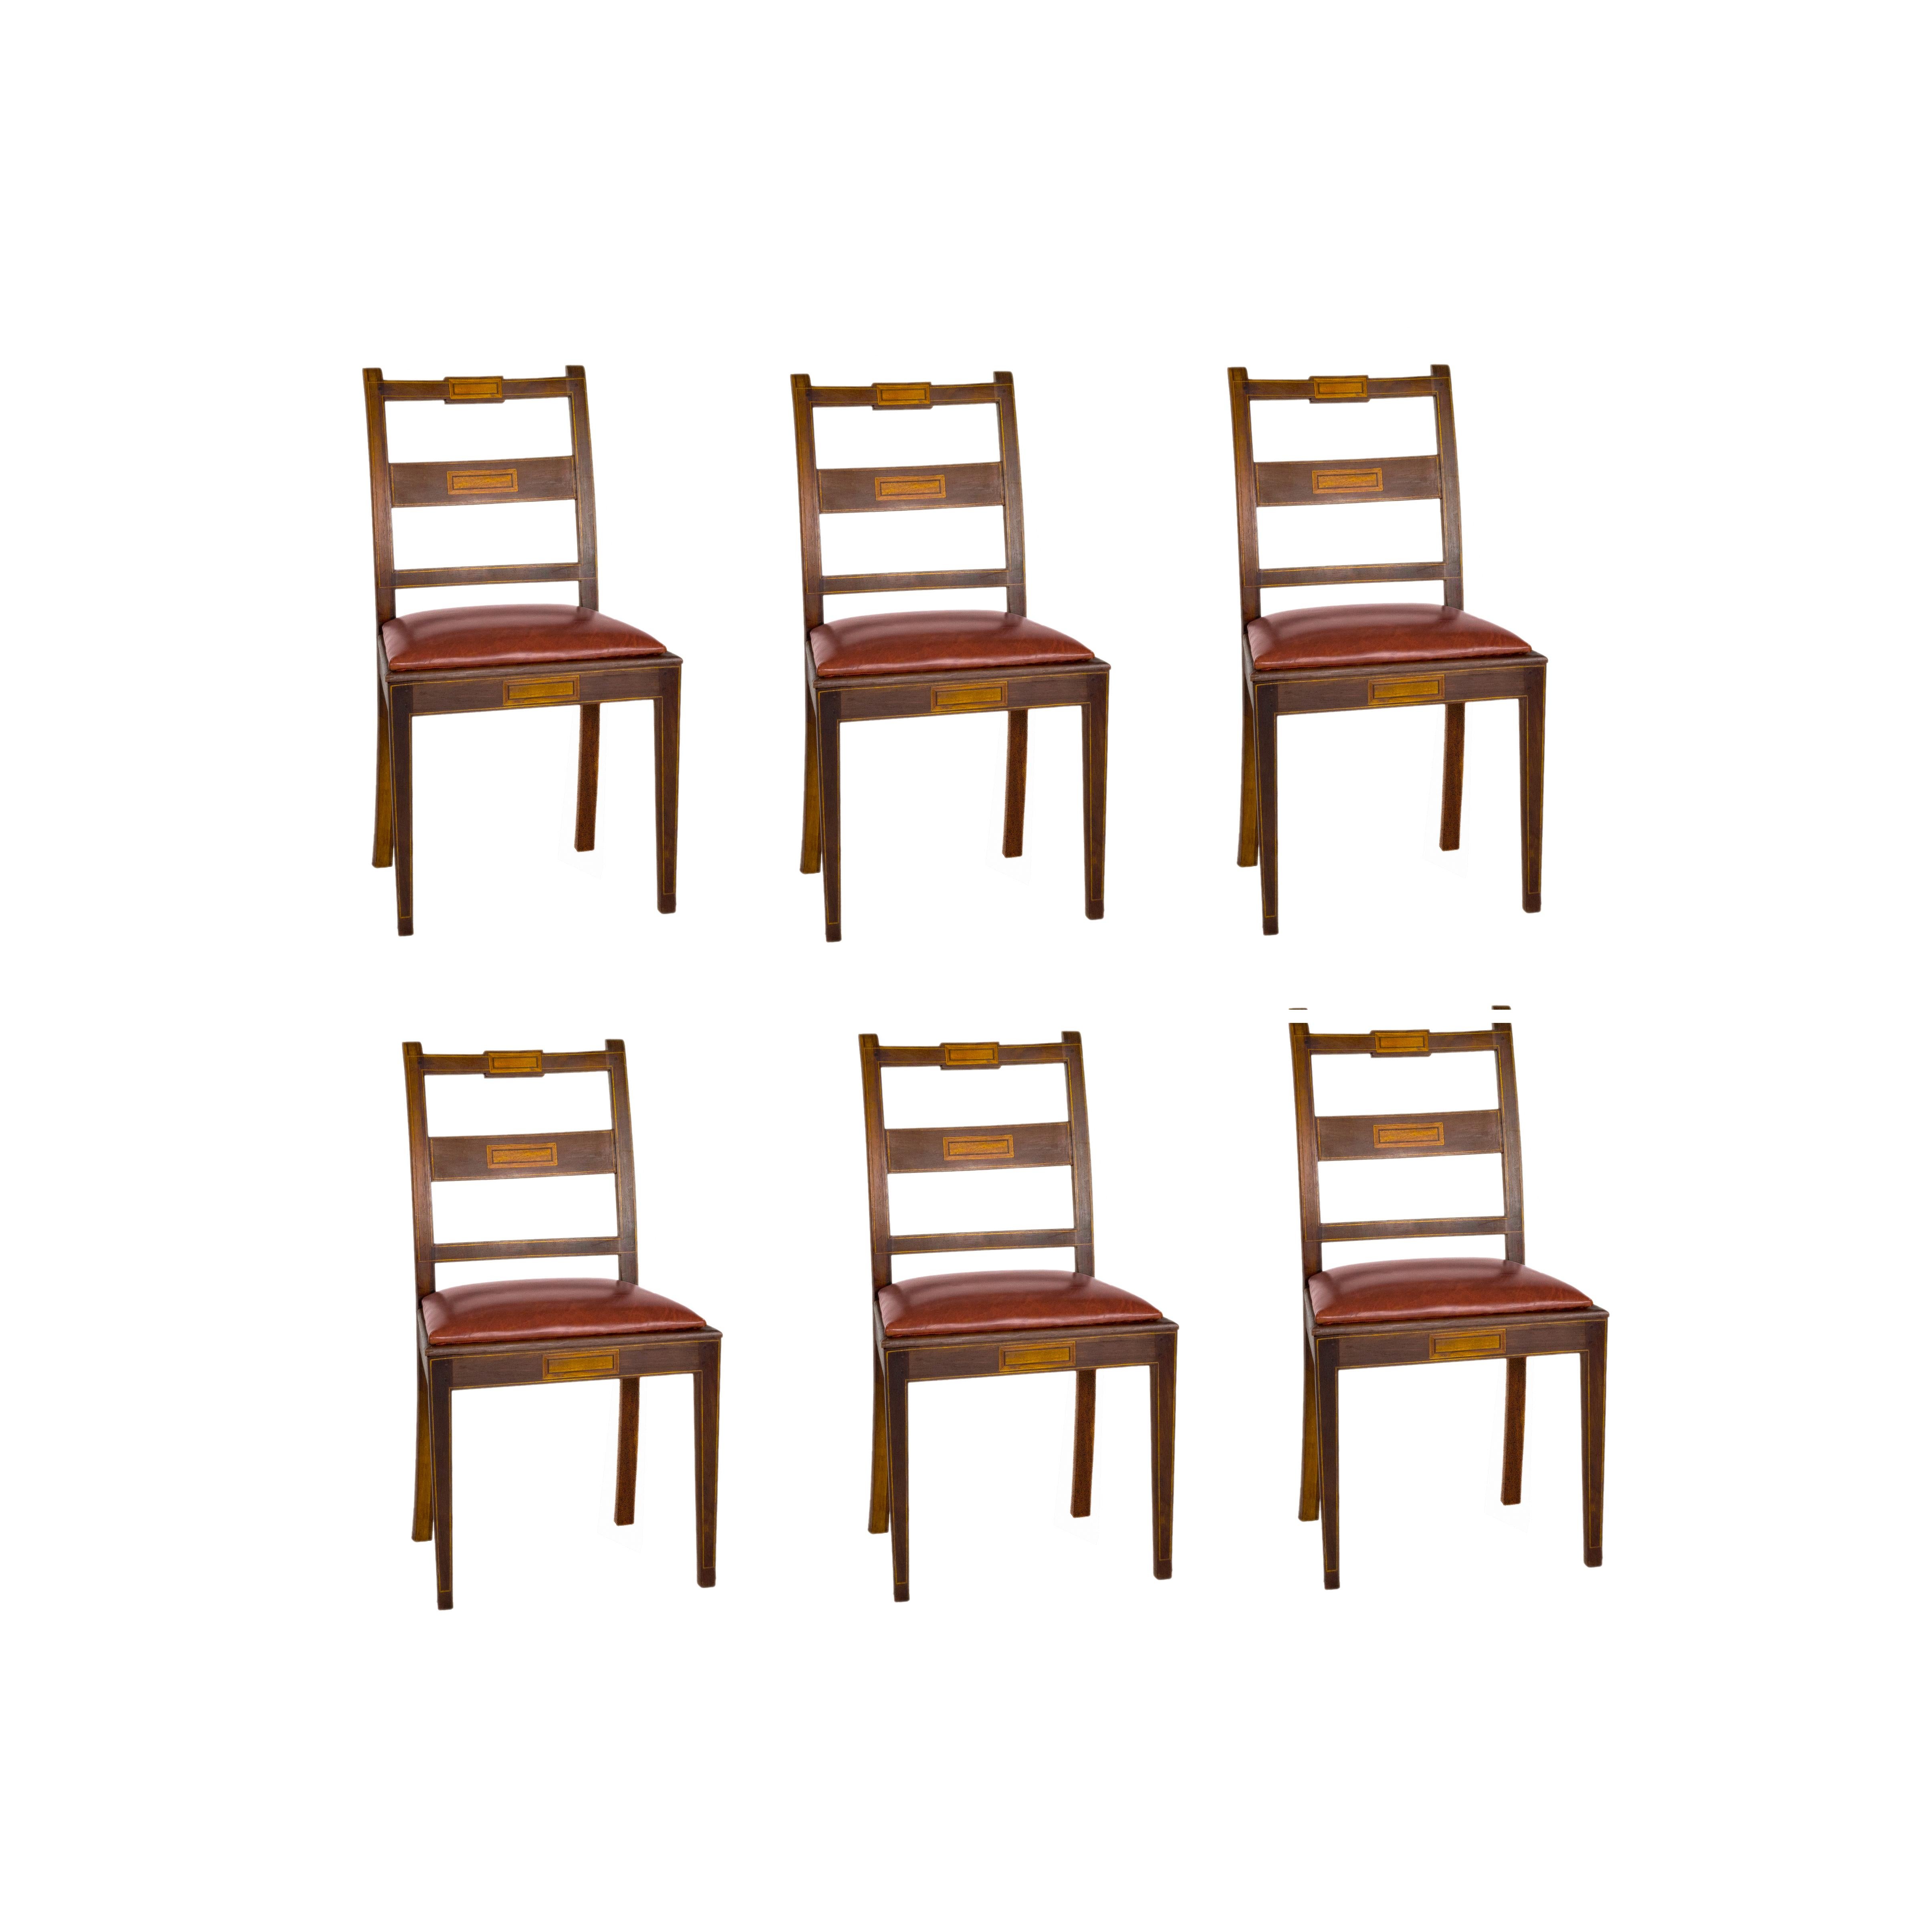 Meticulously maintained solid rosewood dining chair set with natural straw upholstery and soft leather upper, double layer system, linear marquetry.
Classic Portuguese style set of six chairs, refinished by a carpenter, in great condition.